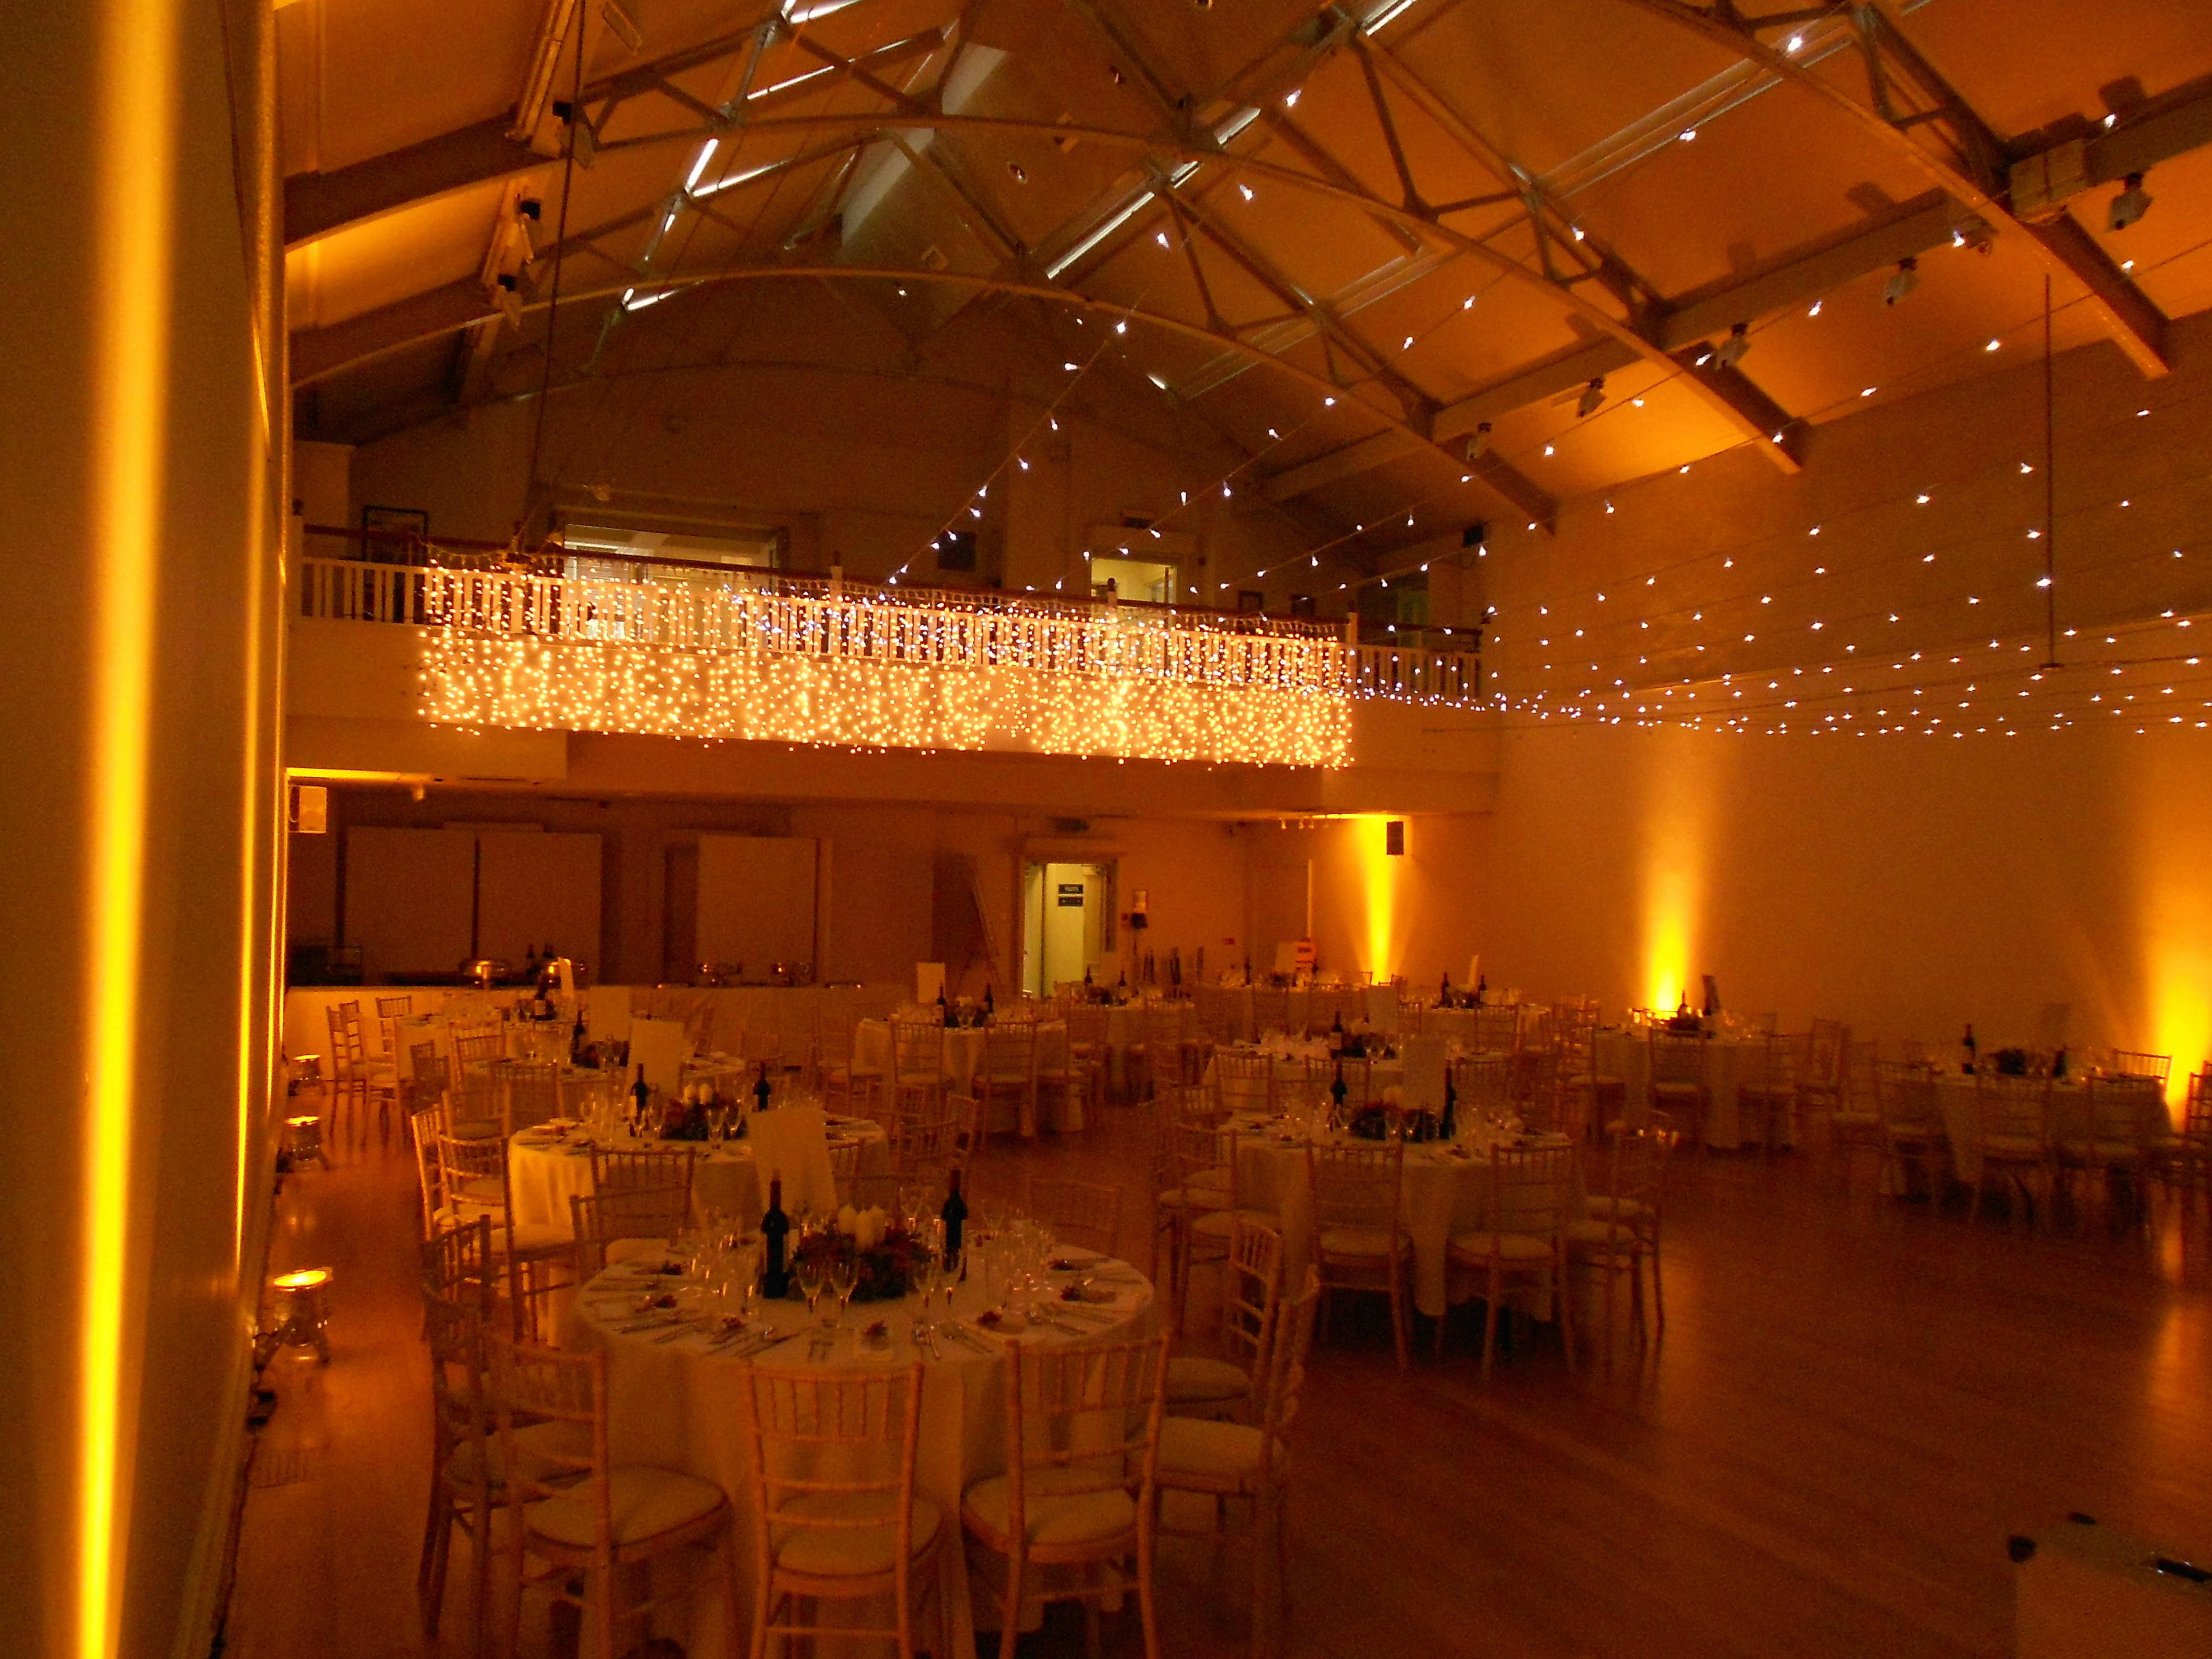 Bar Mitzvah Venues in London - The Hellenic Centre